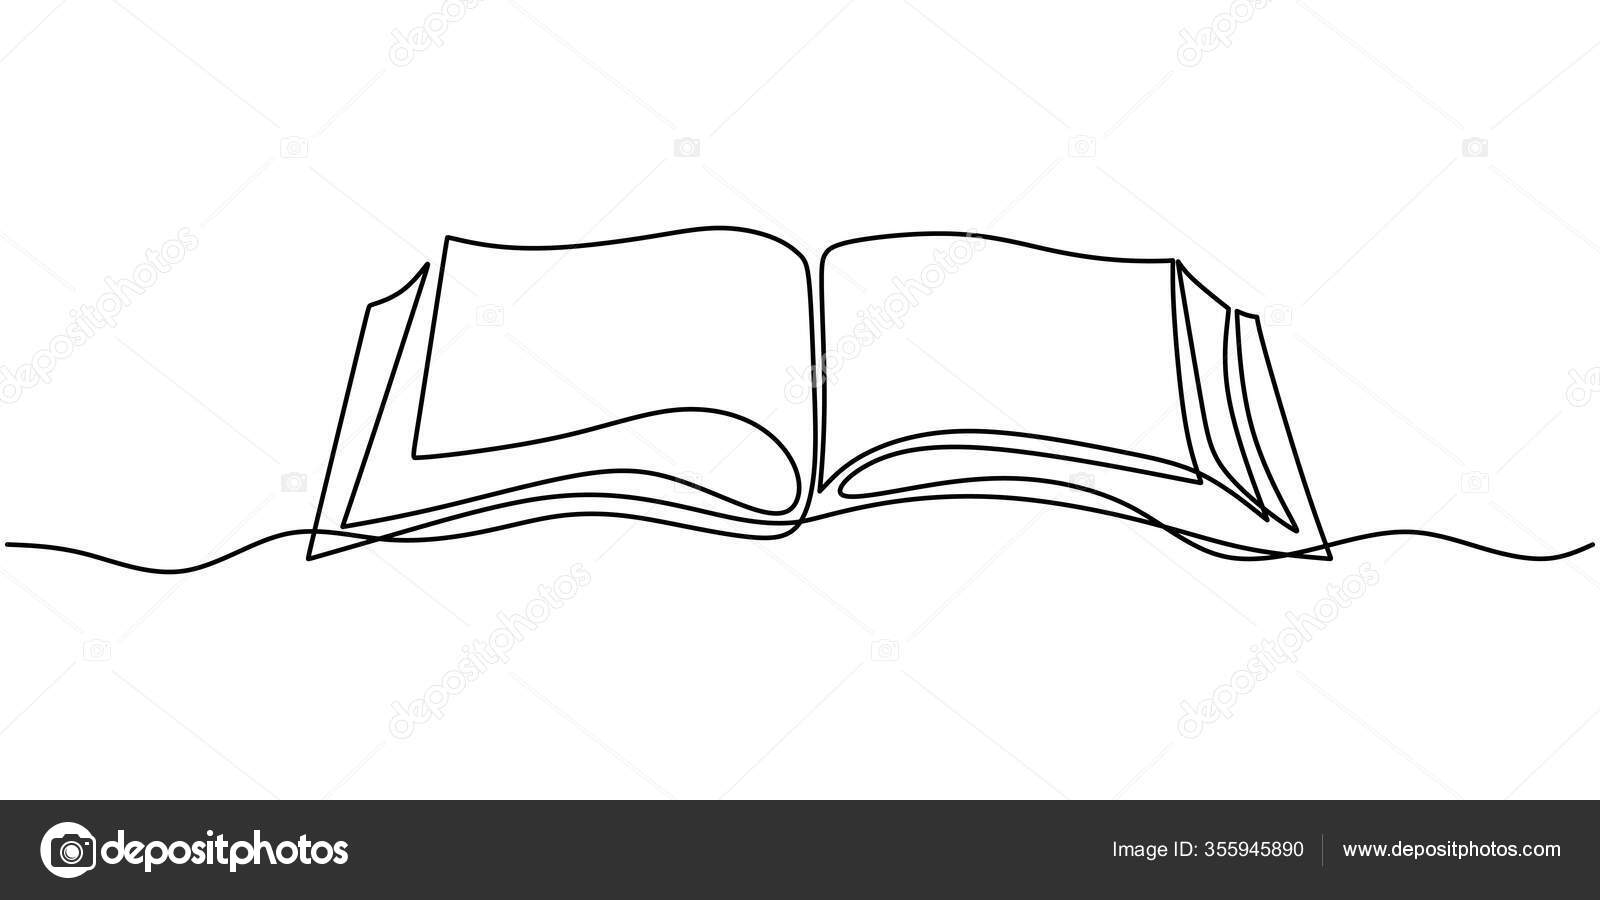 Study and knowledge concept illustration. Hand drawn open book